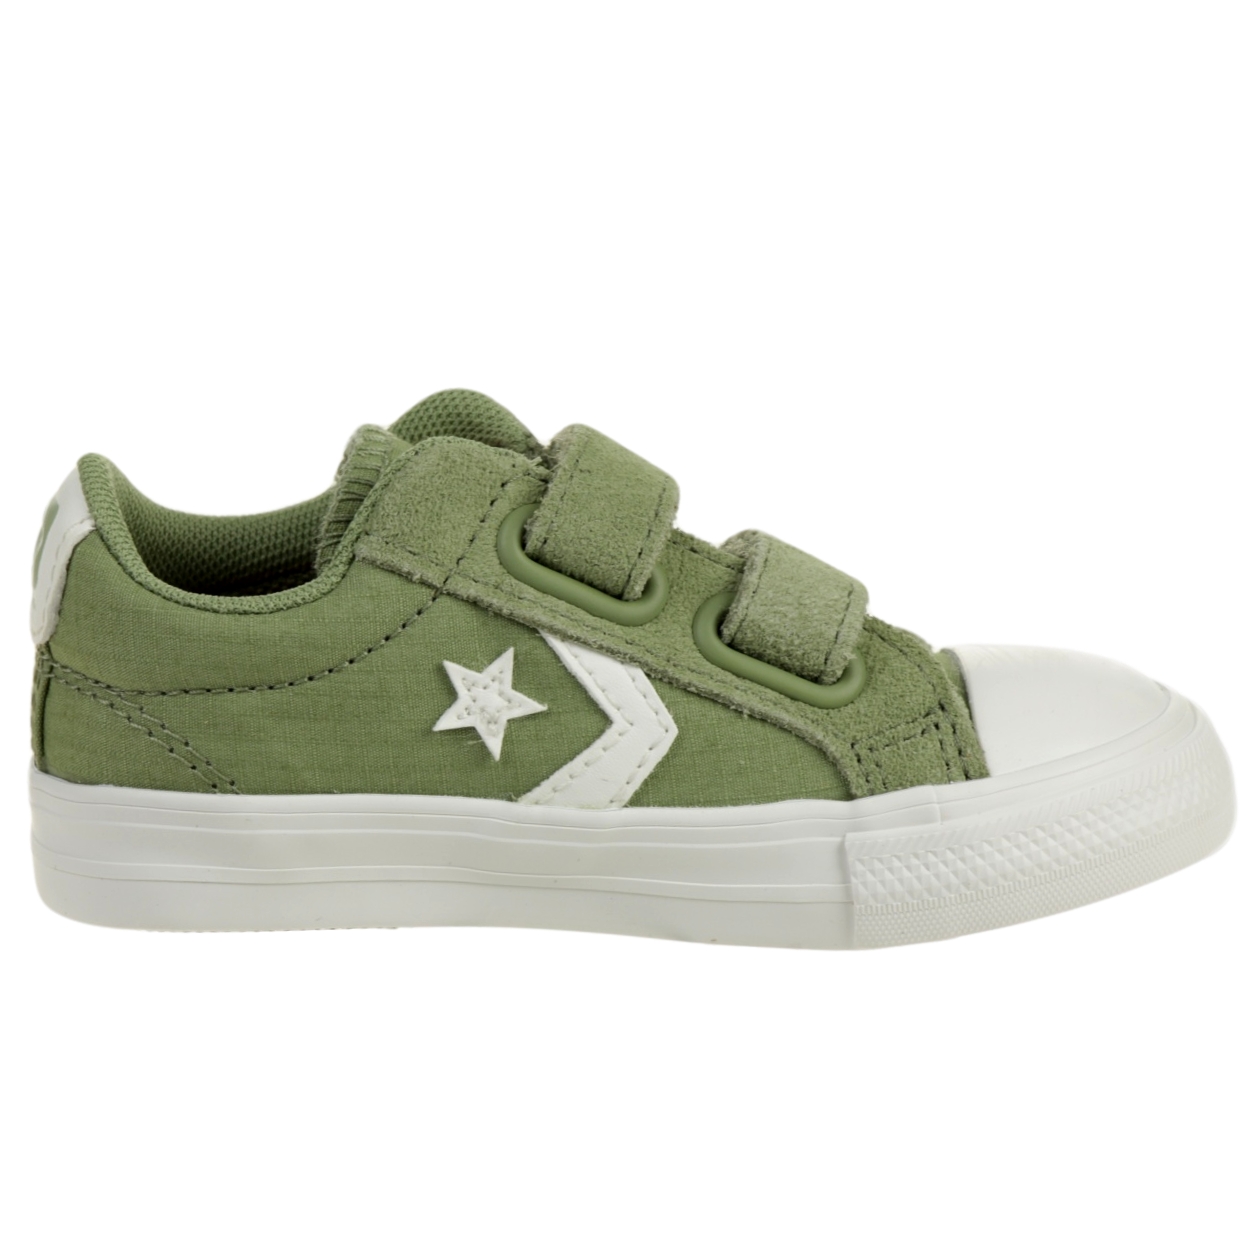 Converse CTAS 2V OX Ripstop Easy-On Star Player Low Top Kinder Sneaker 767548C Grün